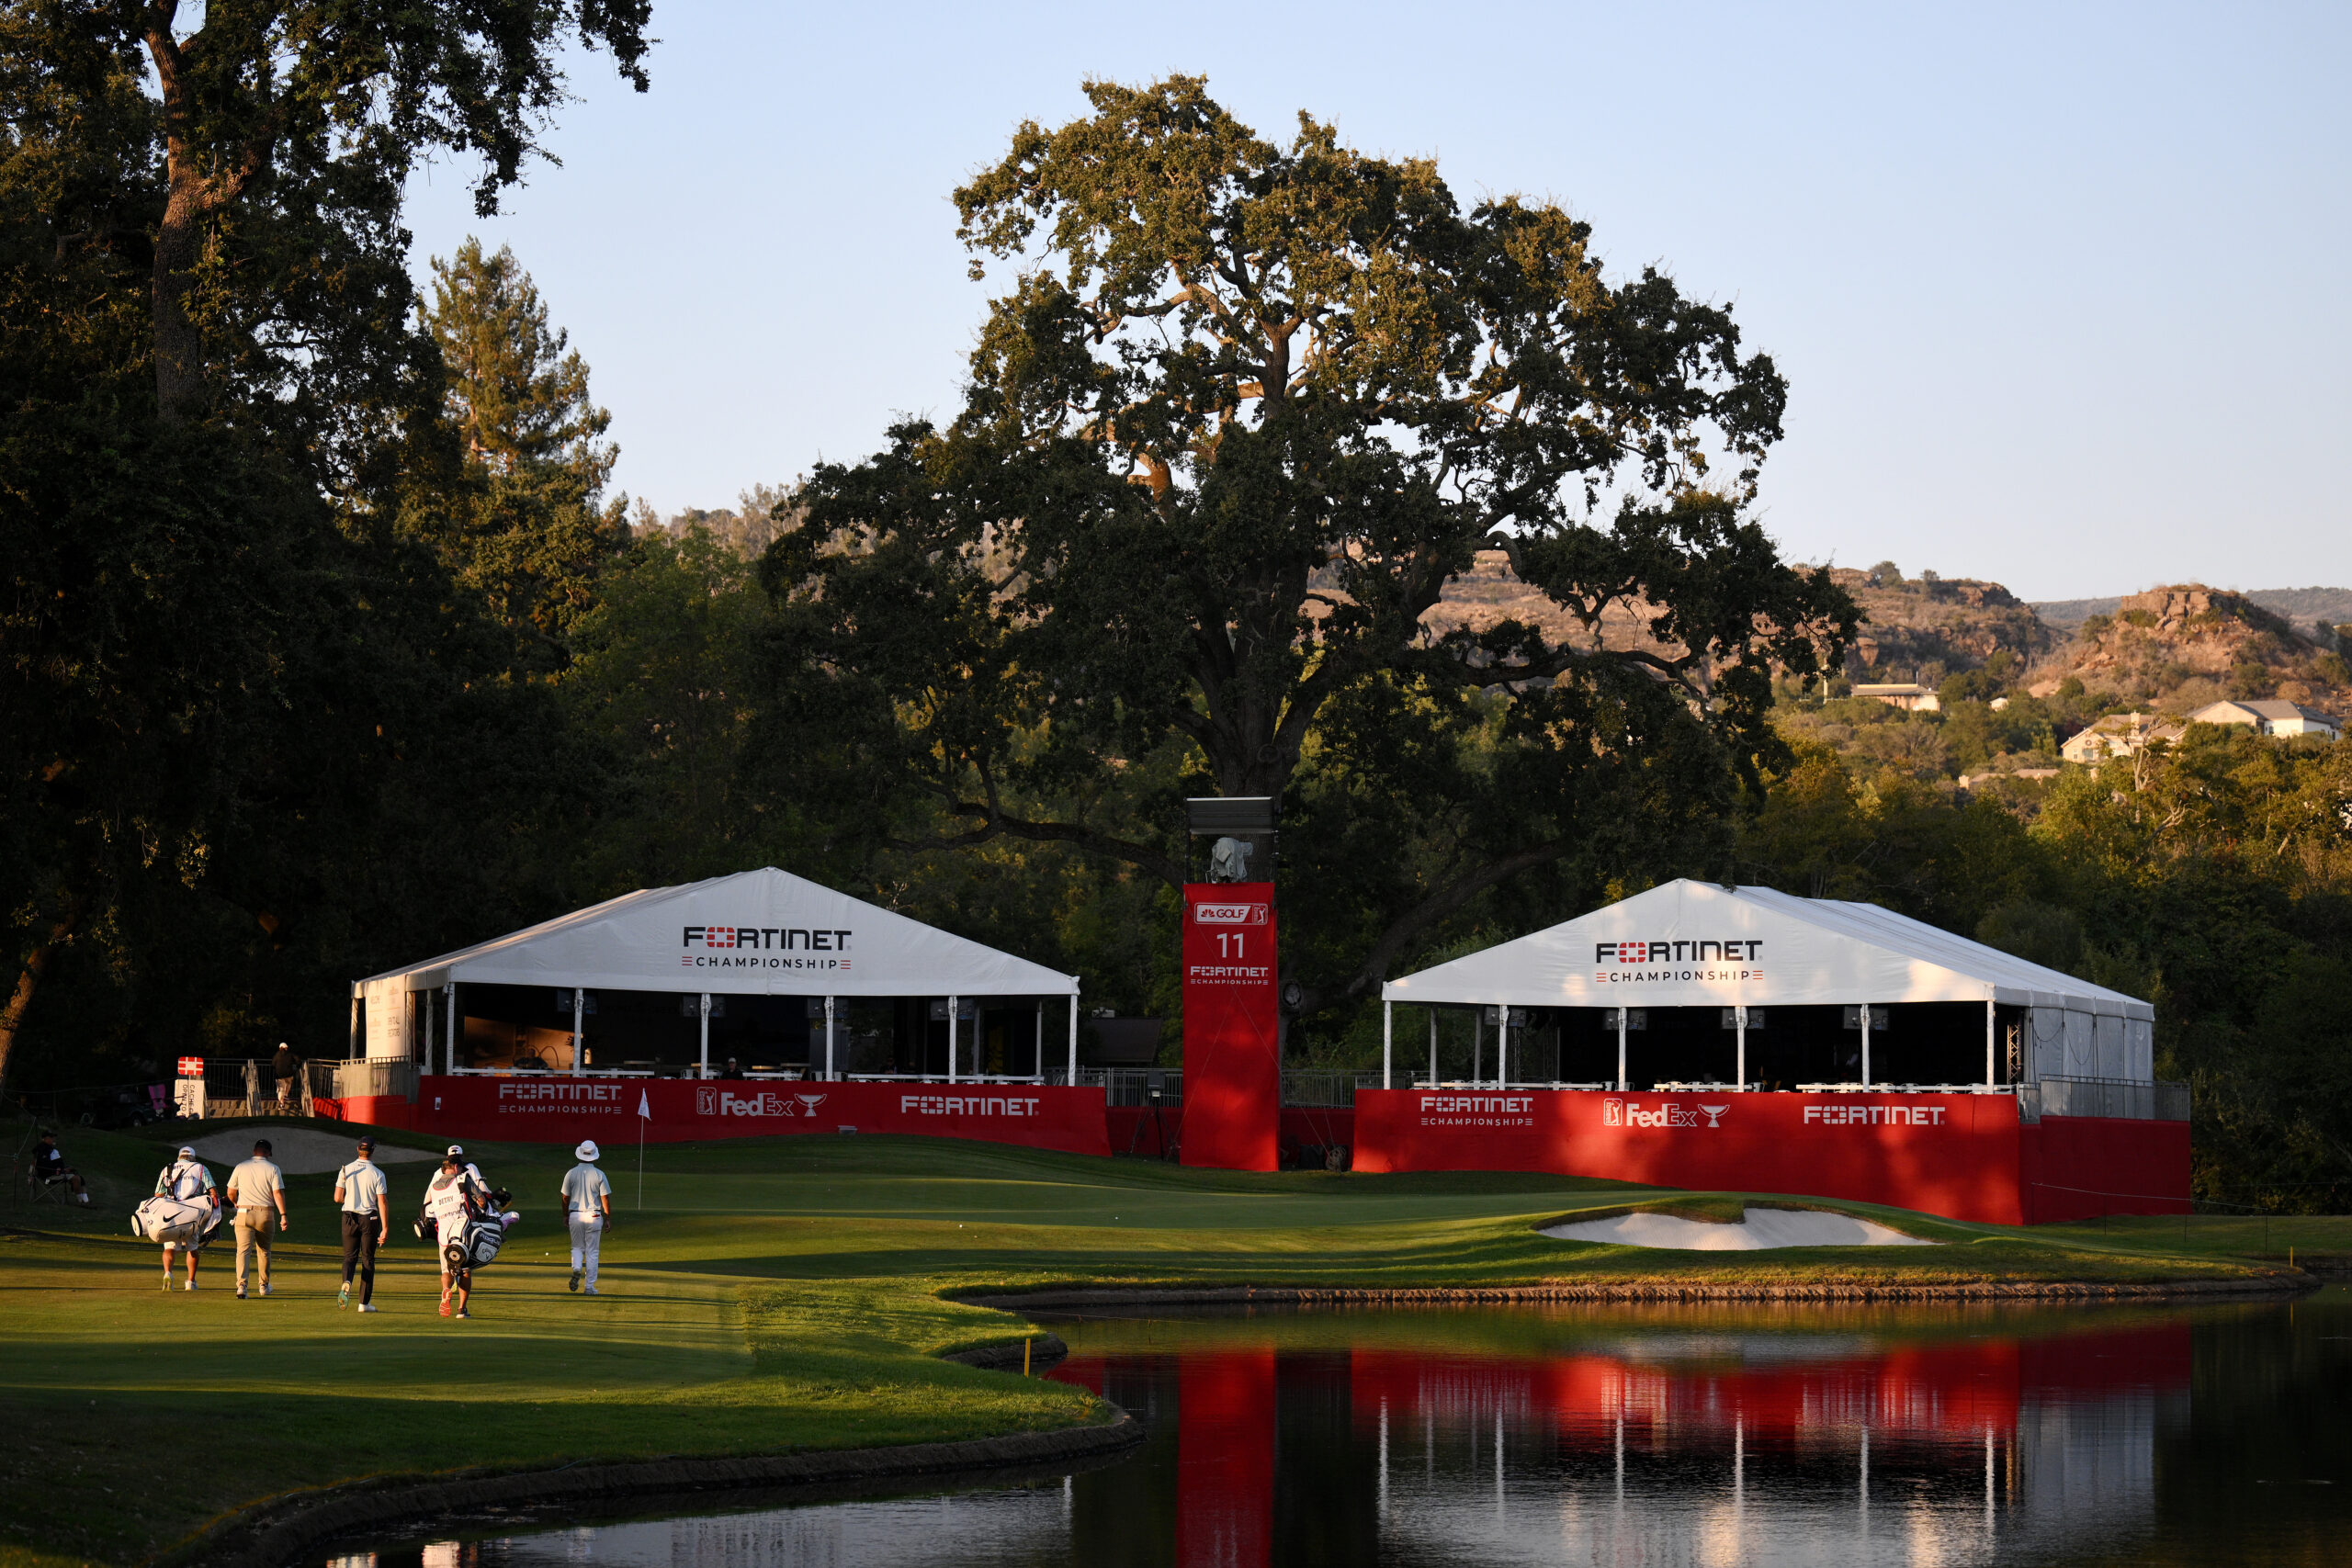 2022 Fortinet Championship tee times, TV info for Saturday’s third round